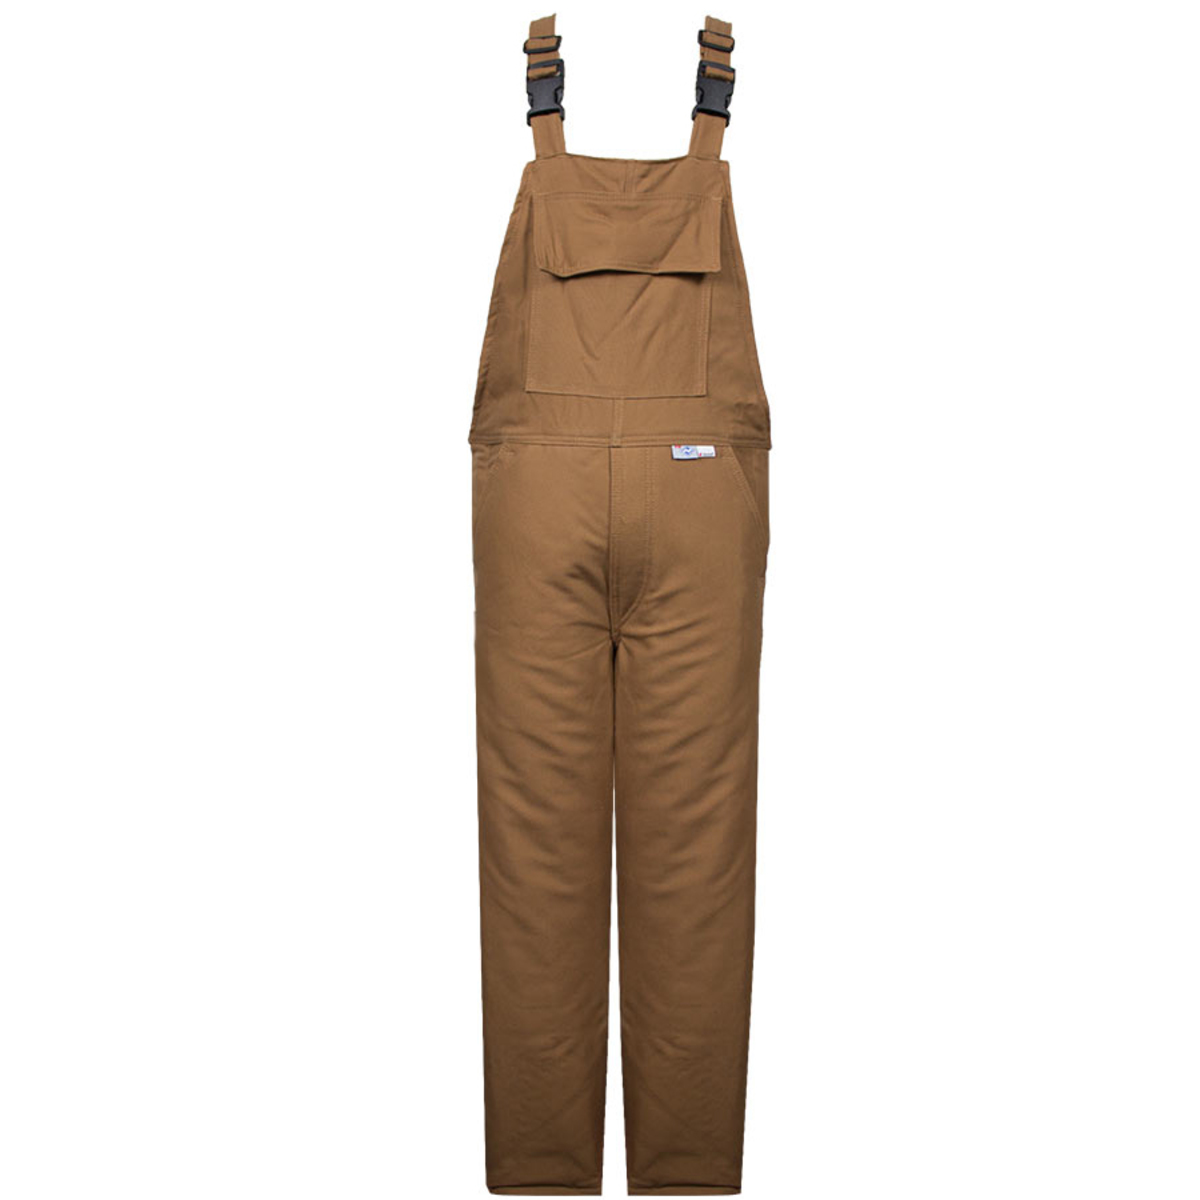 National Safety Apparel Small Regular Brown Westex UltraSoft® Duck/DWR Flame Resistant Bib Overall FR Quilted Lining With Zipper